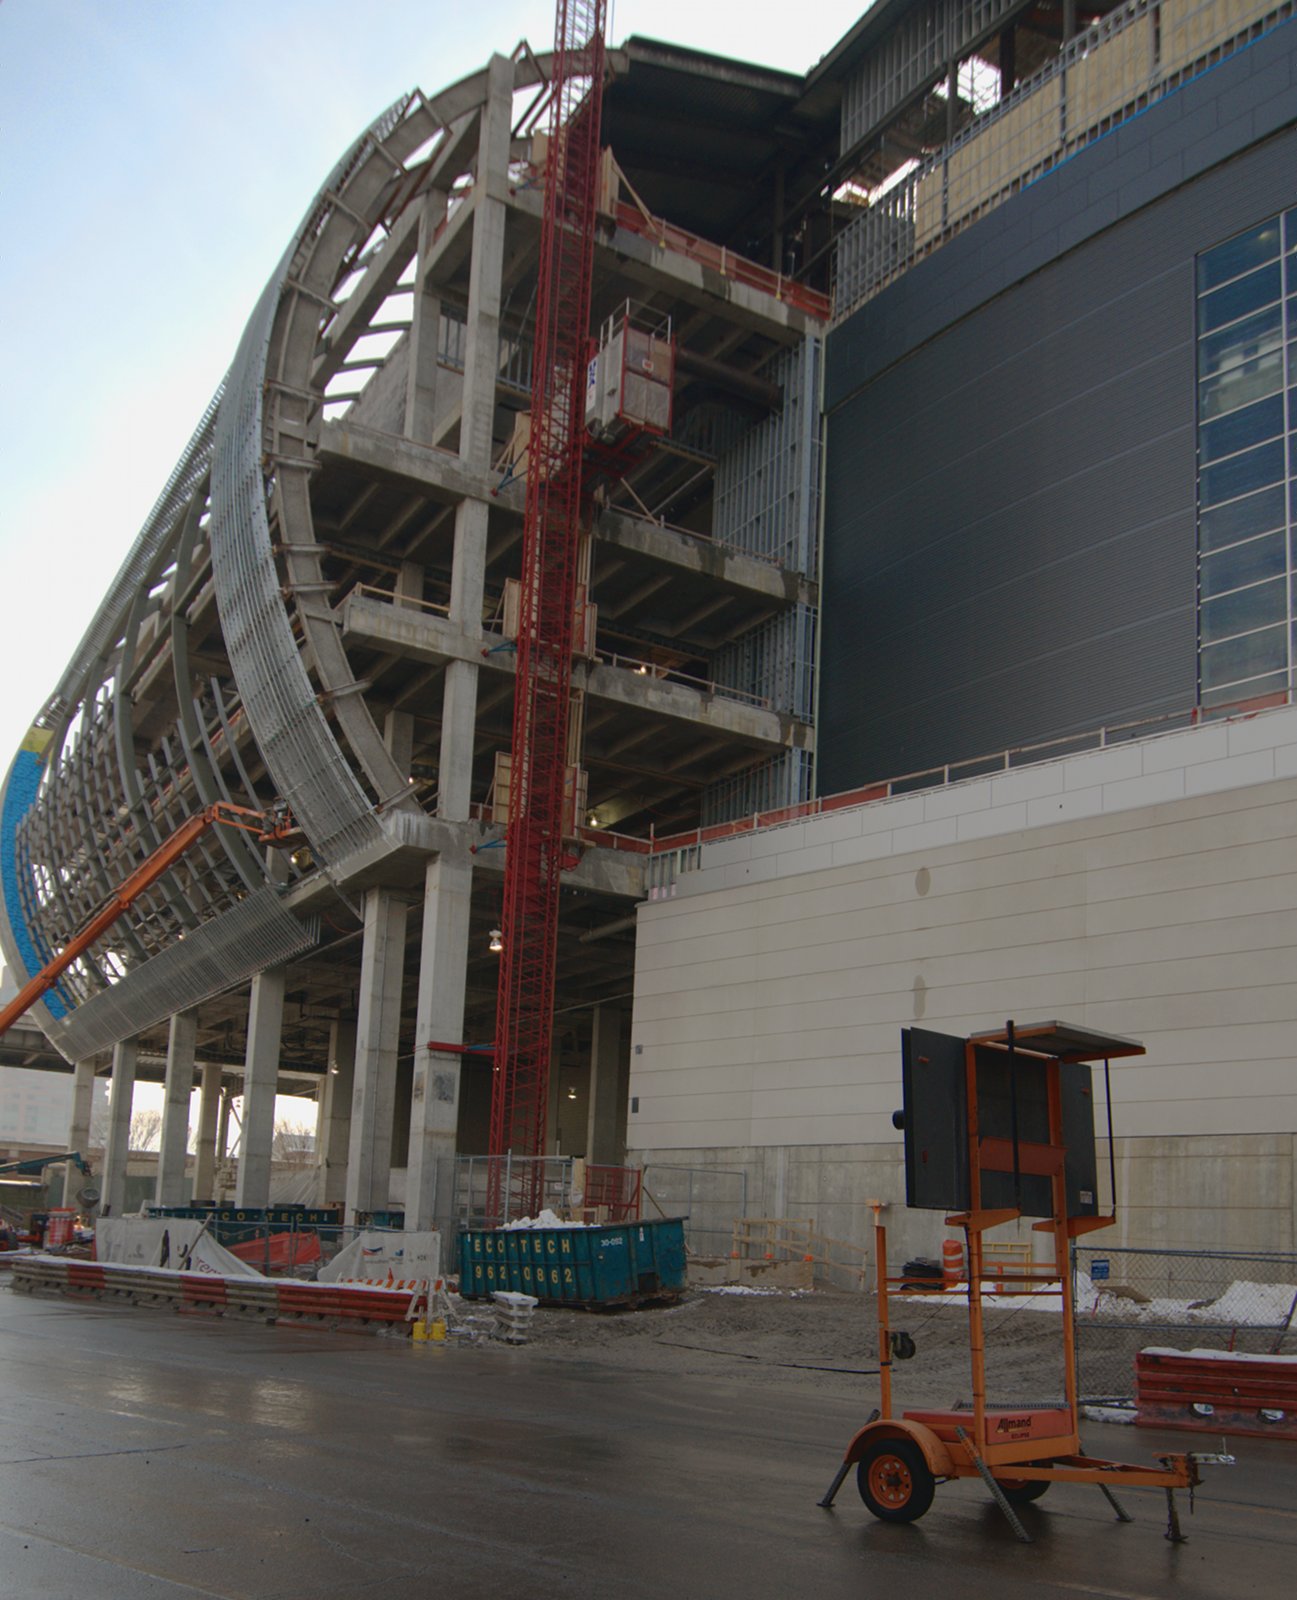 University of Louisville Arena under construction designed by Populous